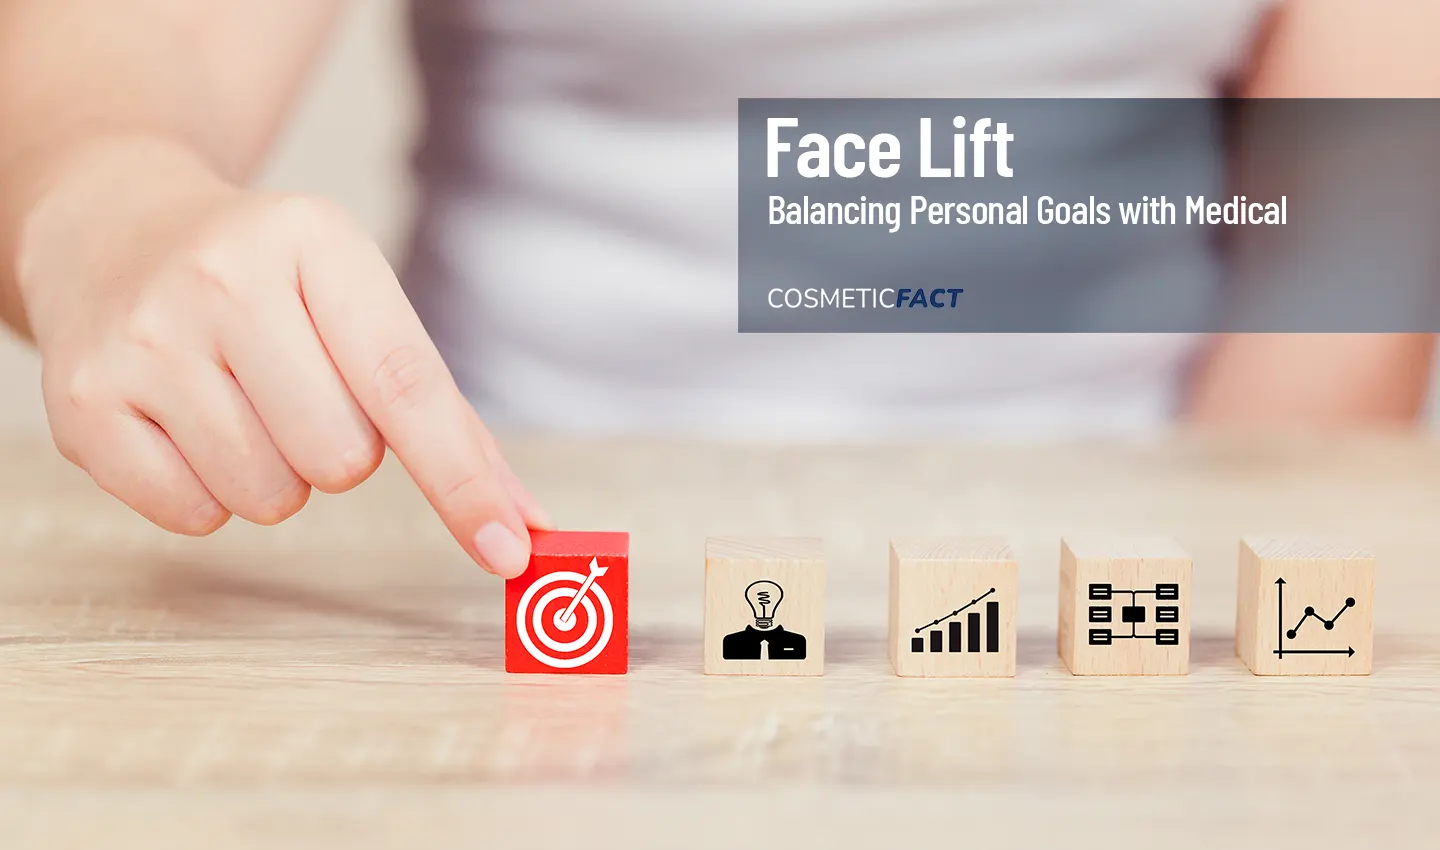 Image of a man placing his finger on the target logo among planning logos, emphasizing the importance of balancing personal goals with medical realities in facelift surgery.